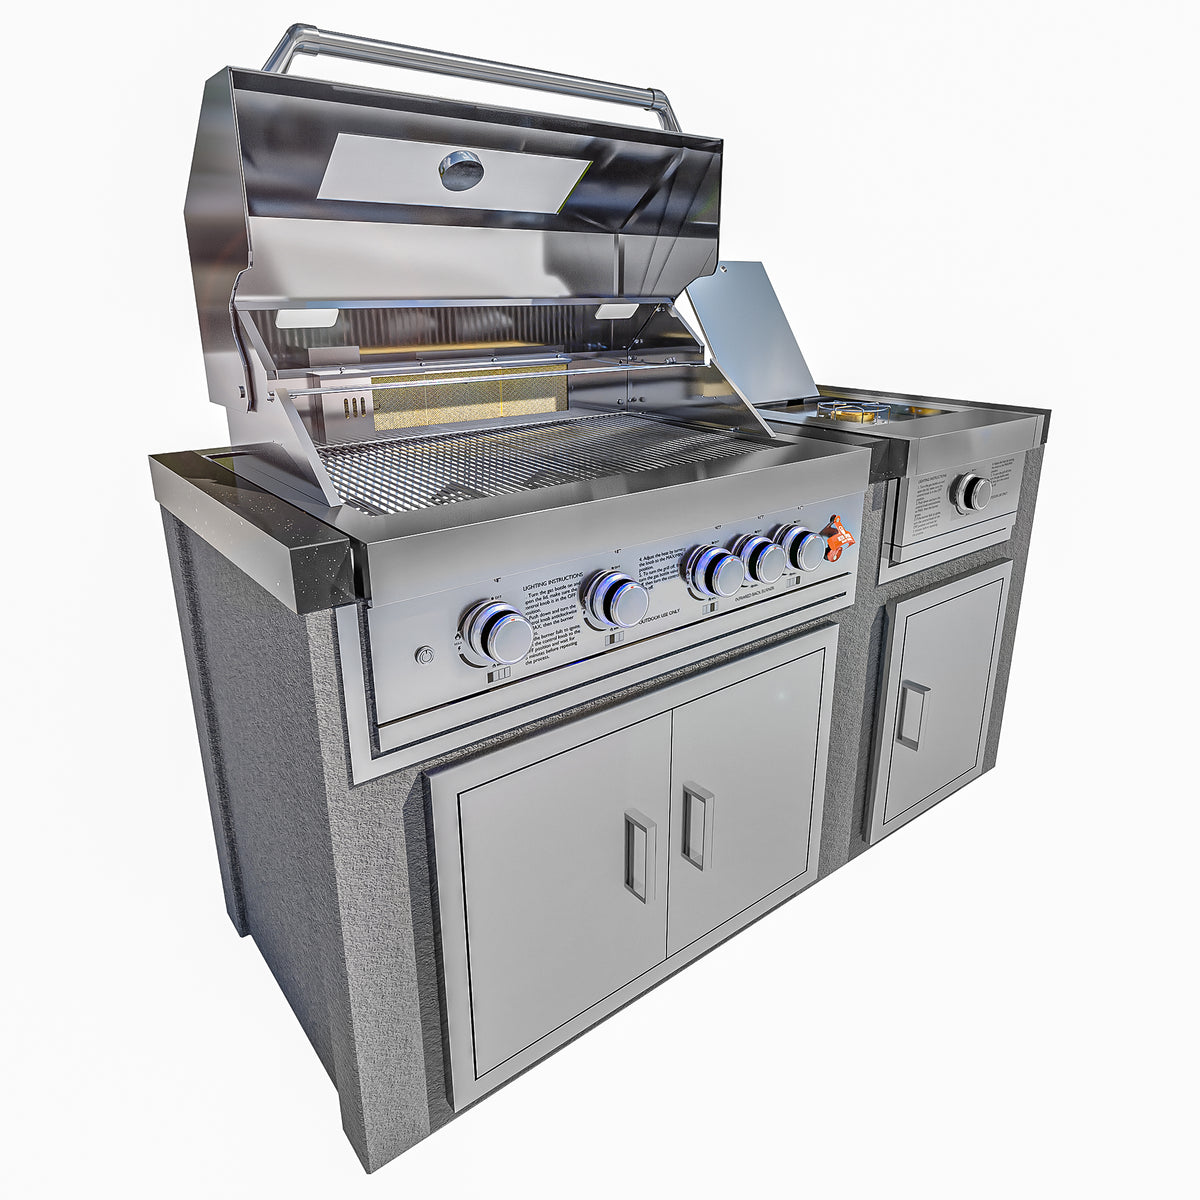 Draco Grills Avalon Stainless Steel Straight Outdoor Kitchen with 4 Burner BBQ and Fridge